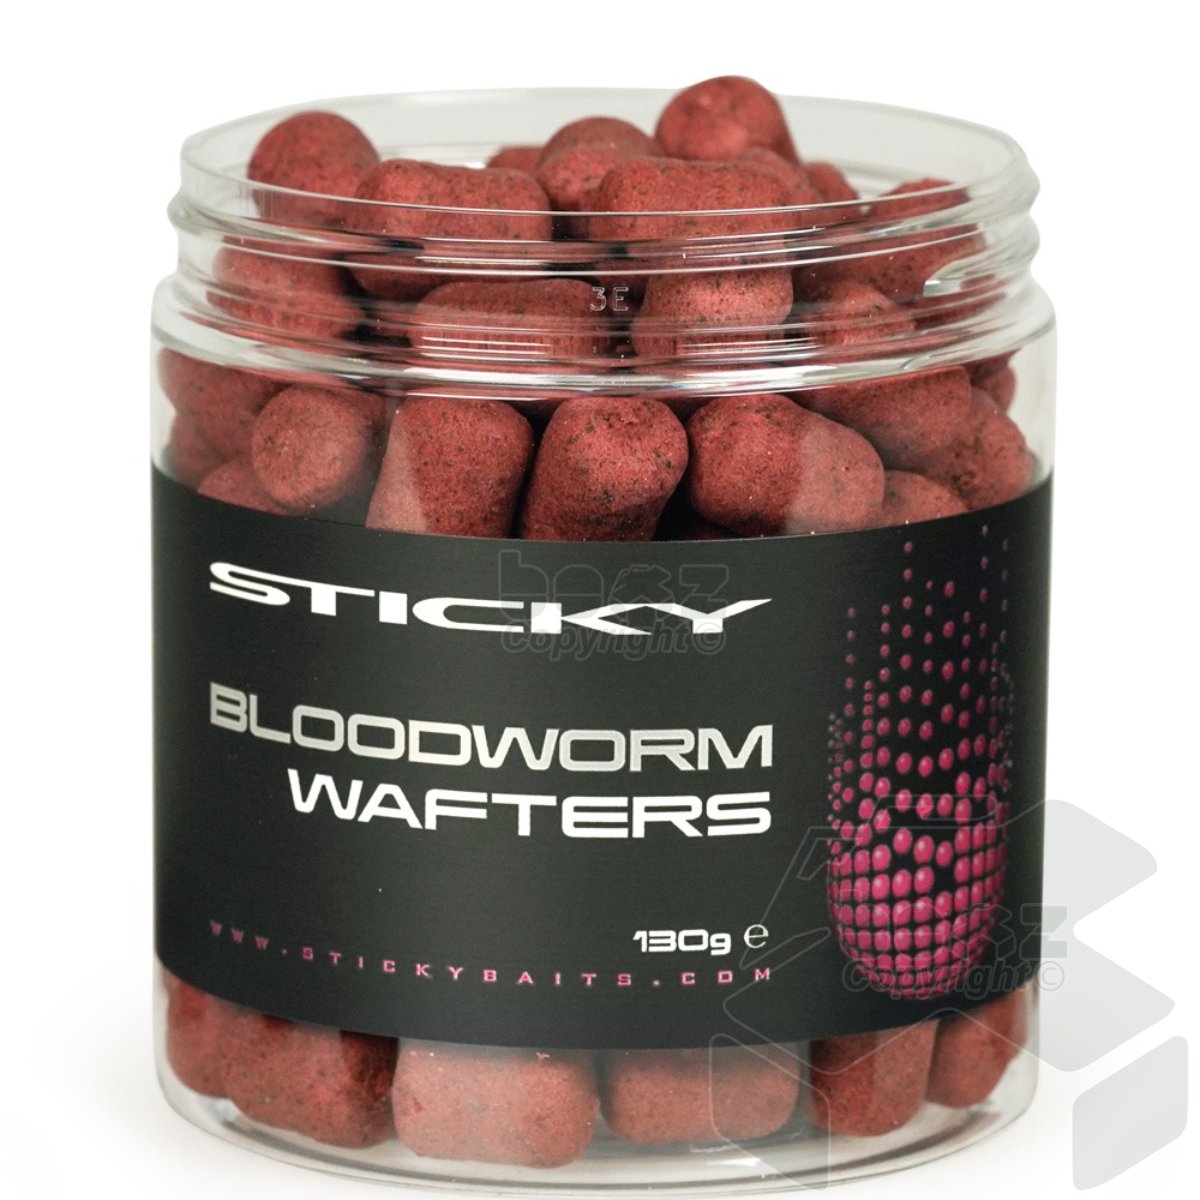 Sticky Bloodworm Wafters 130g Pot